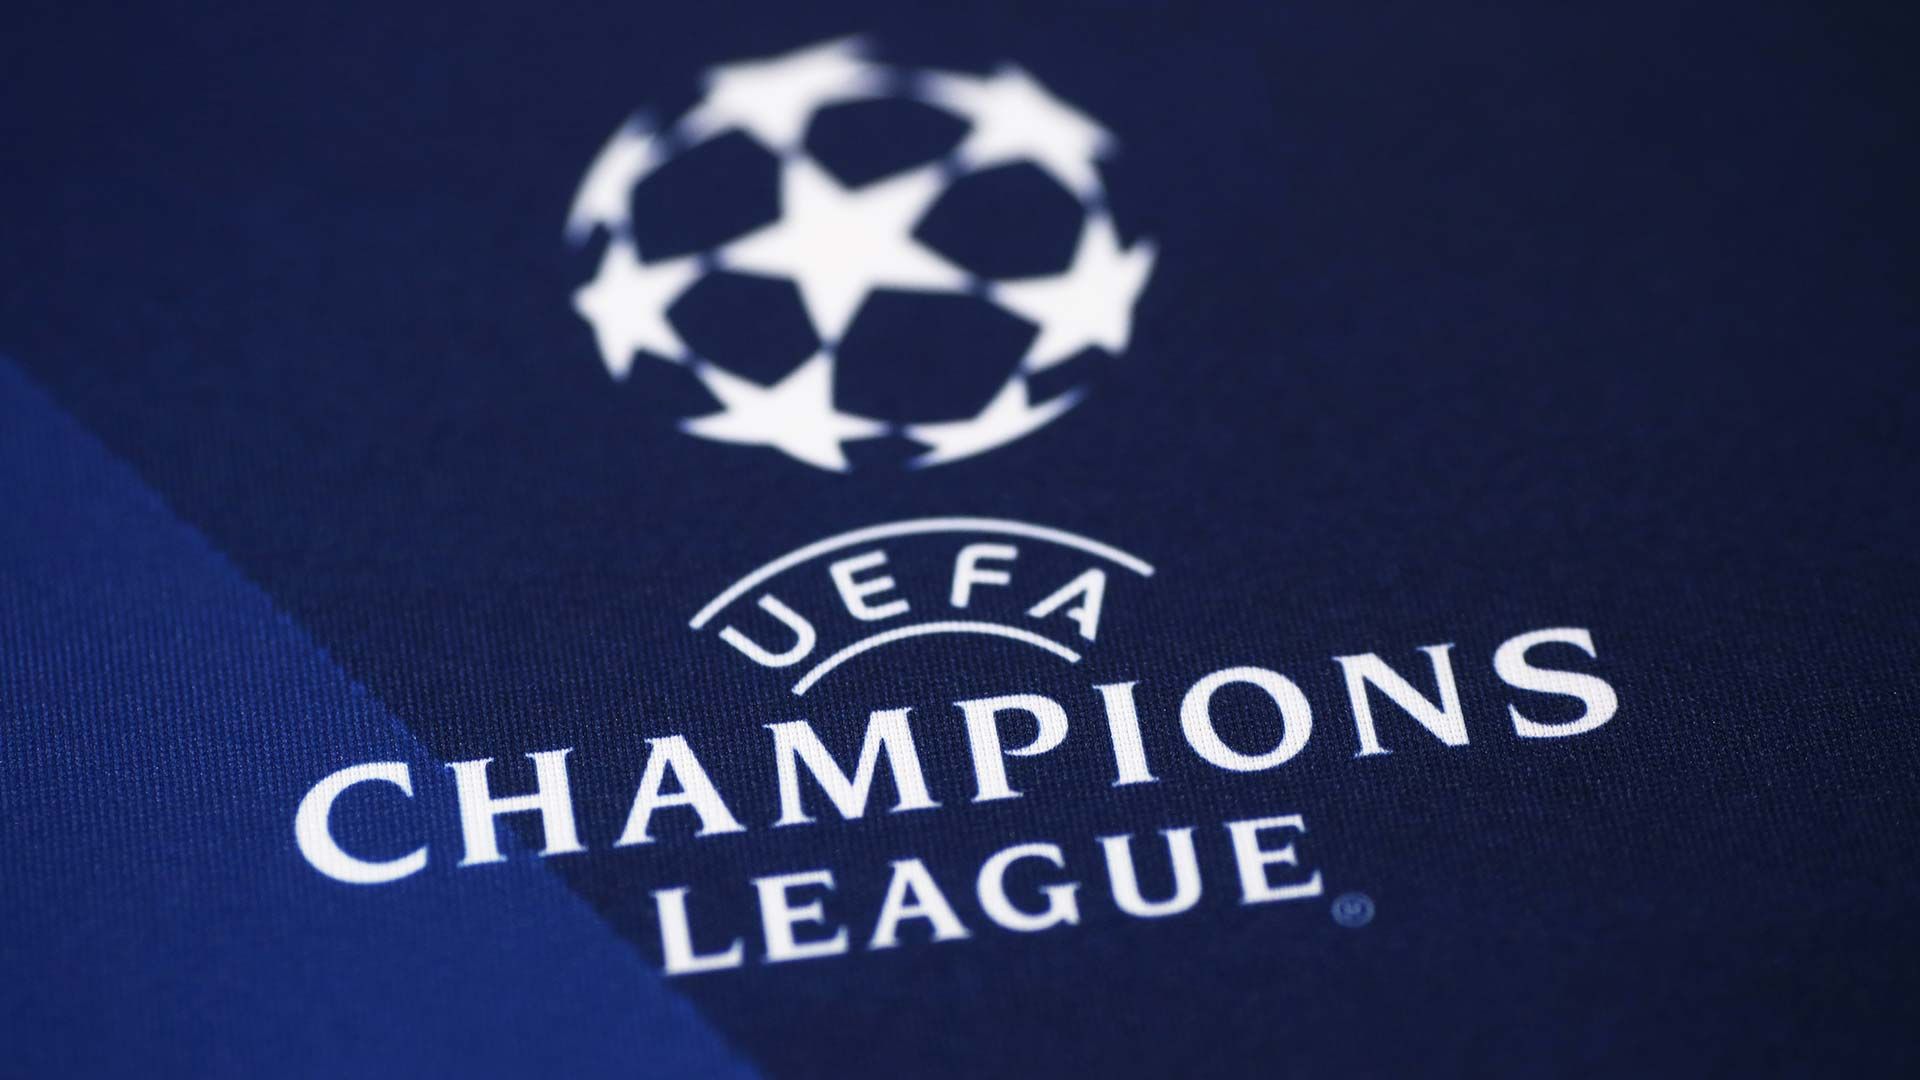 How to watch Champions League live streams online and from anywhere